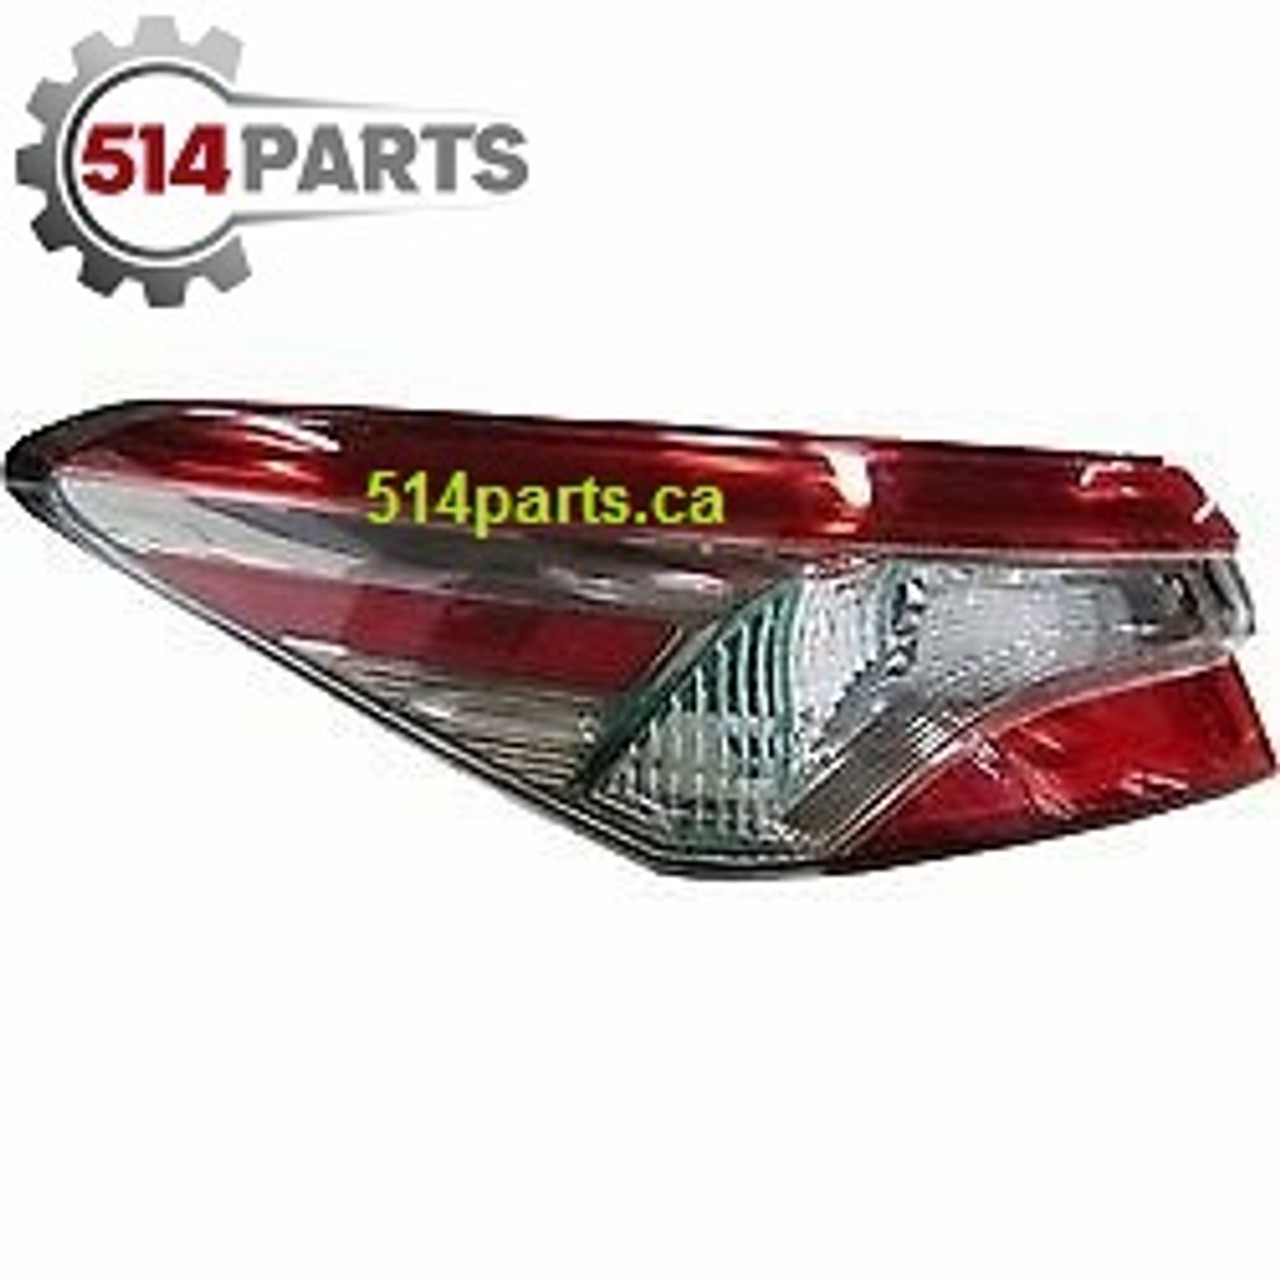 2018 - 2020 TOYOTA CAMRY SE JAPAN BUILT Models TAIL LIGHTS W/SMOKED TINT High Quality - PHARES ARRIERE AVEC TEINTURE FUMEE Haute Qualite